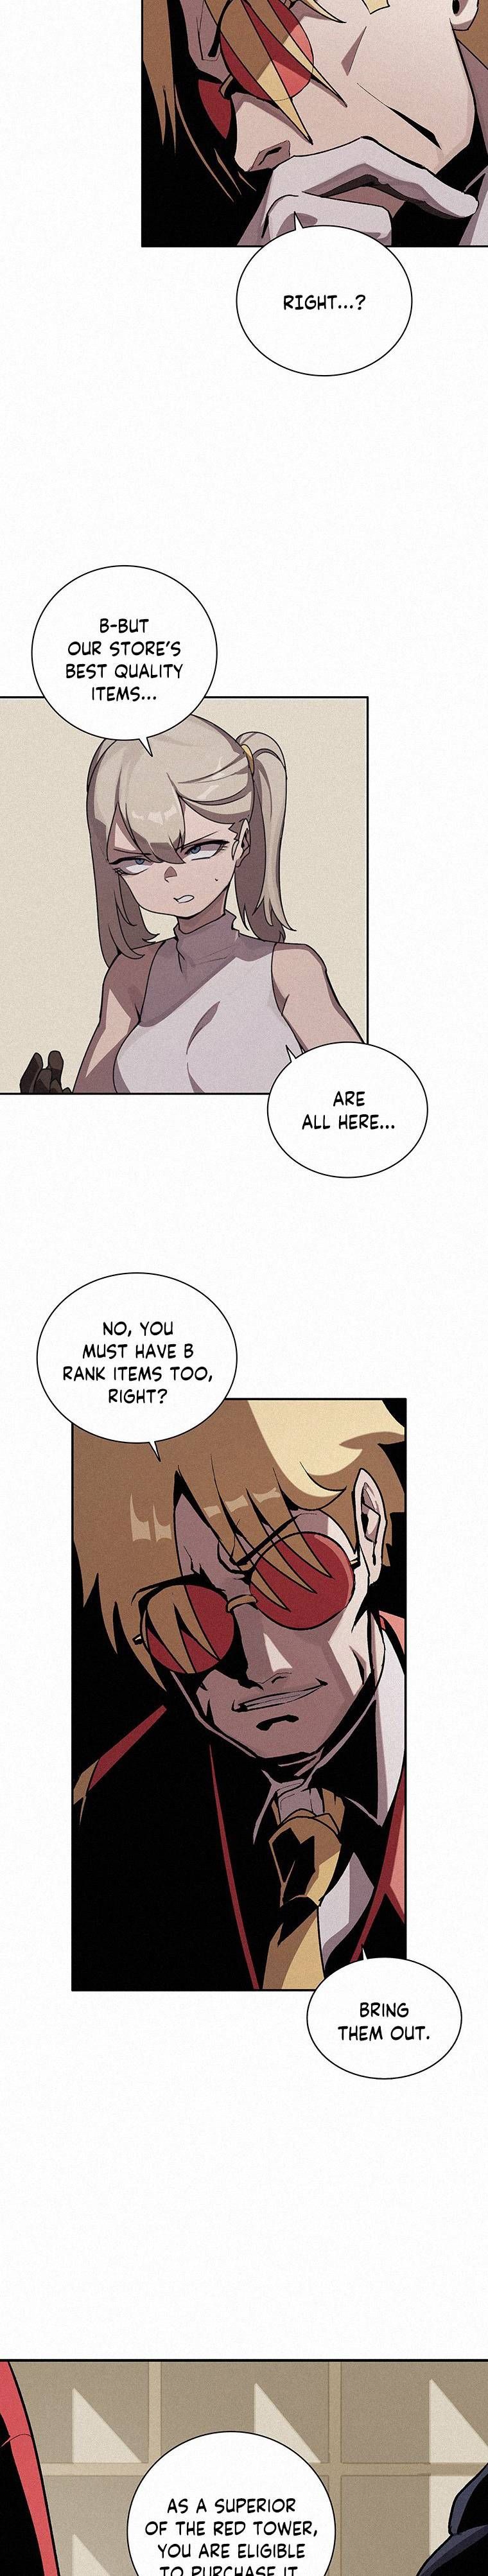 The Book Eating Magician Chapter 24 page 2